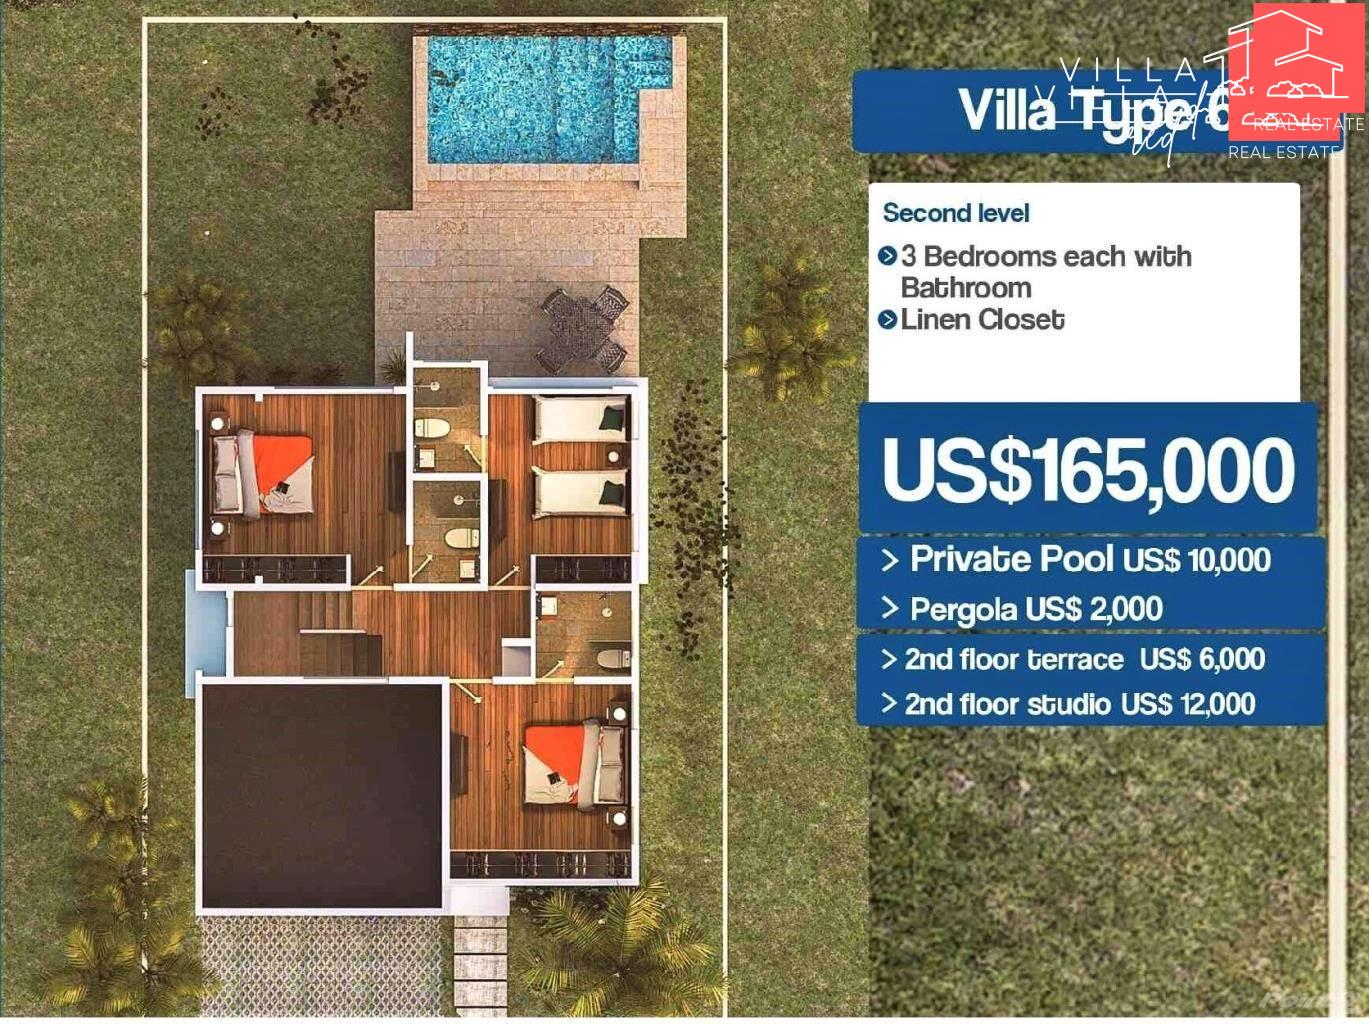 Villa.red Comfortable Villas in Punta Cana With Private Pool in Patio https://villa.red/property/comfortable-villas-in-punta-cana-with-private-pool-in-patio